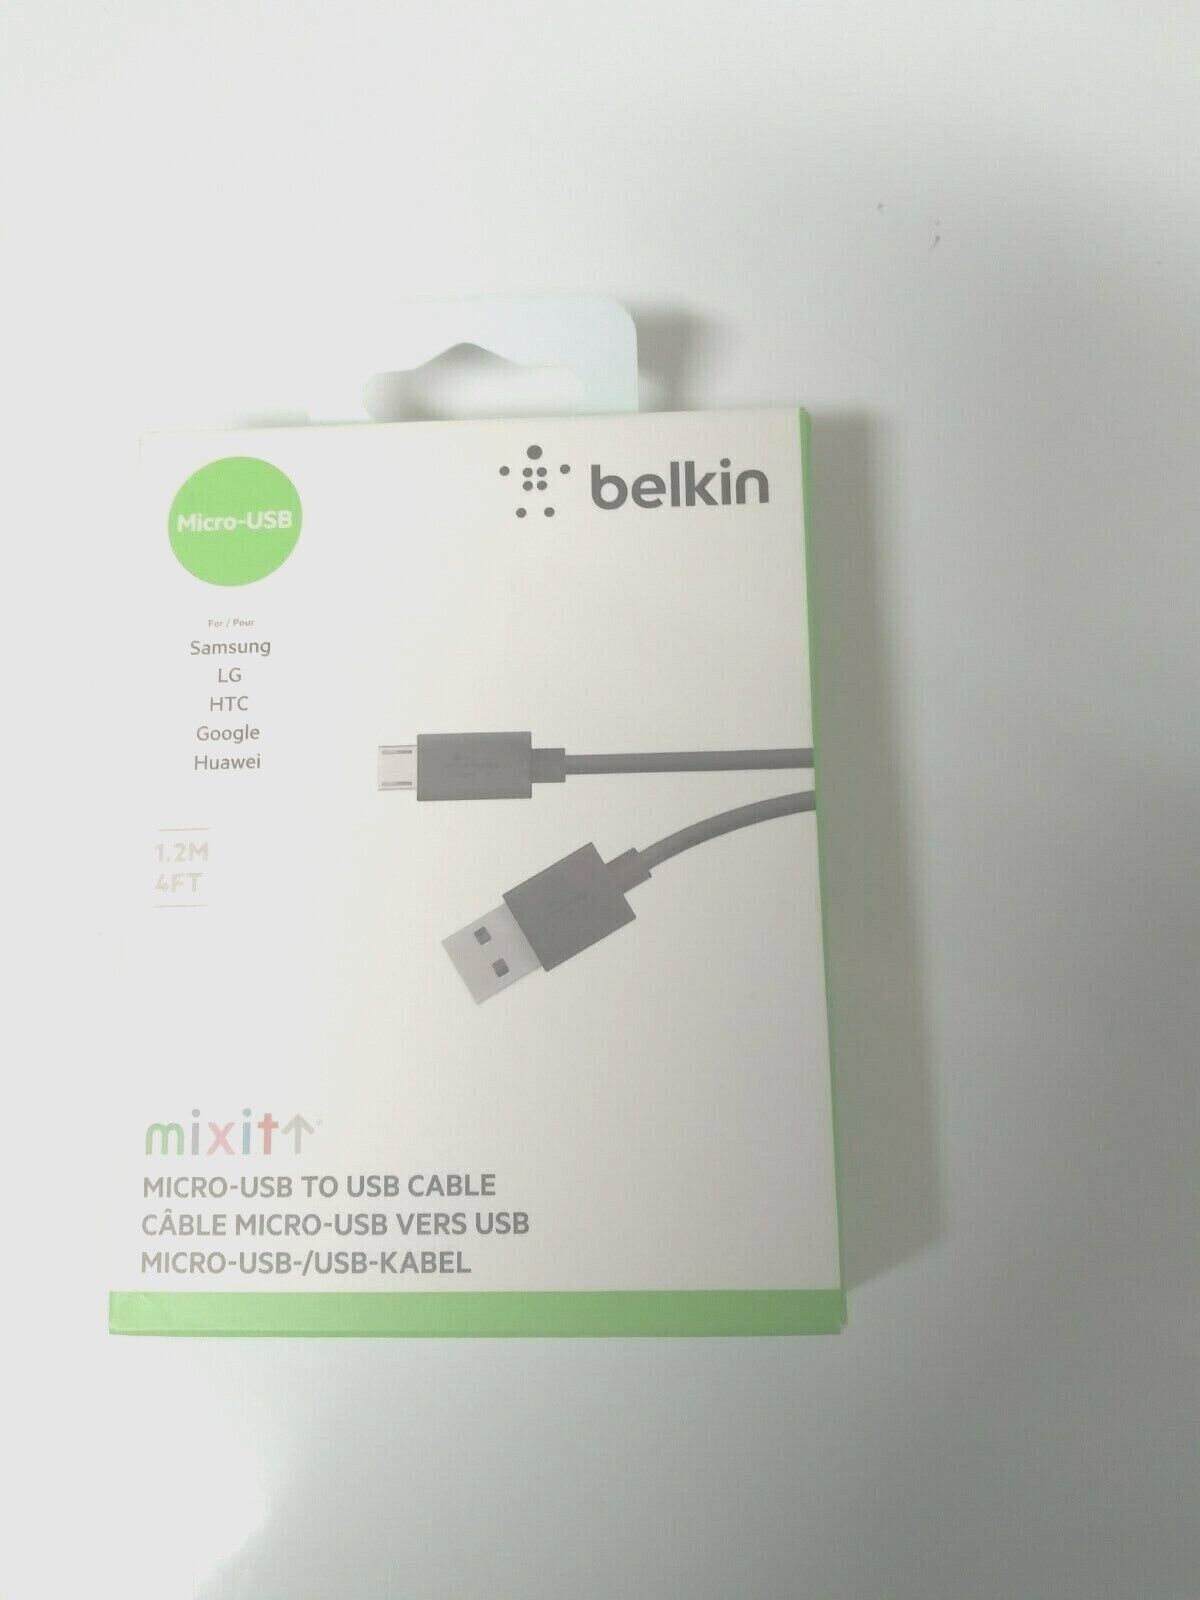 Belkin Micro-USB To USB 4ft Cable For Samsung, LG, Google & Hu...